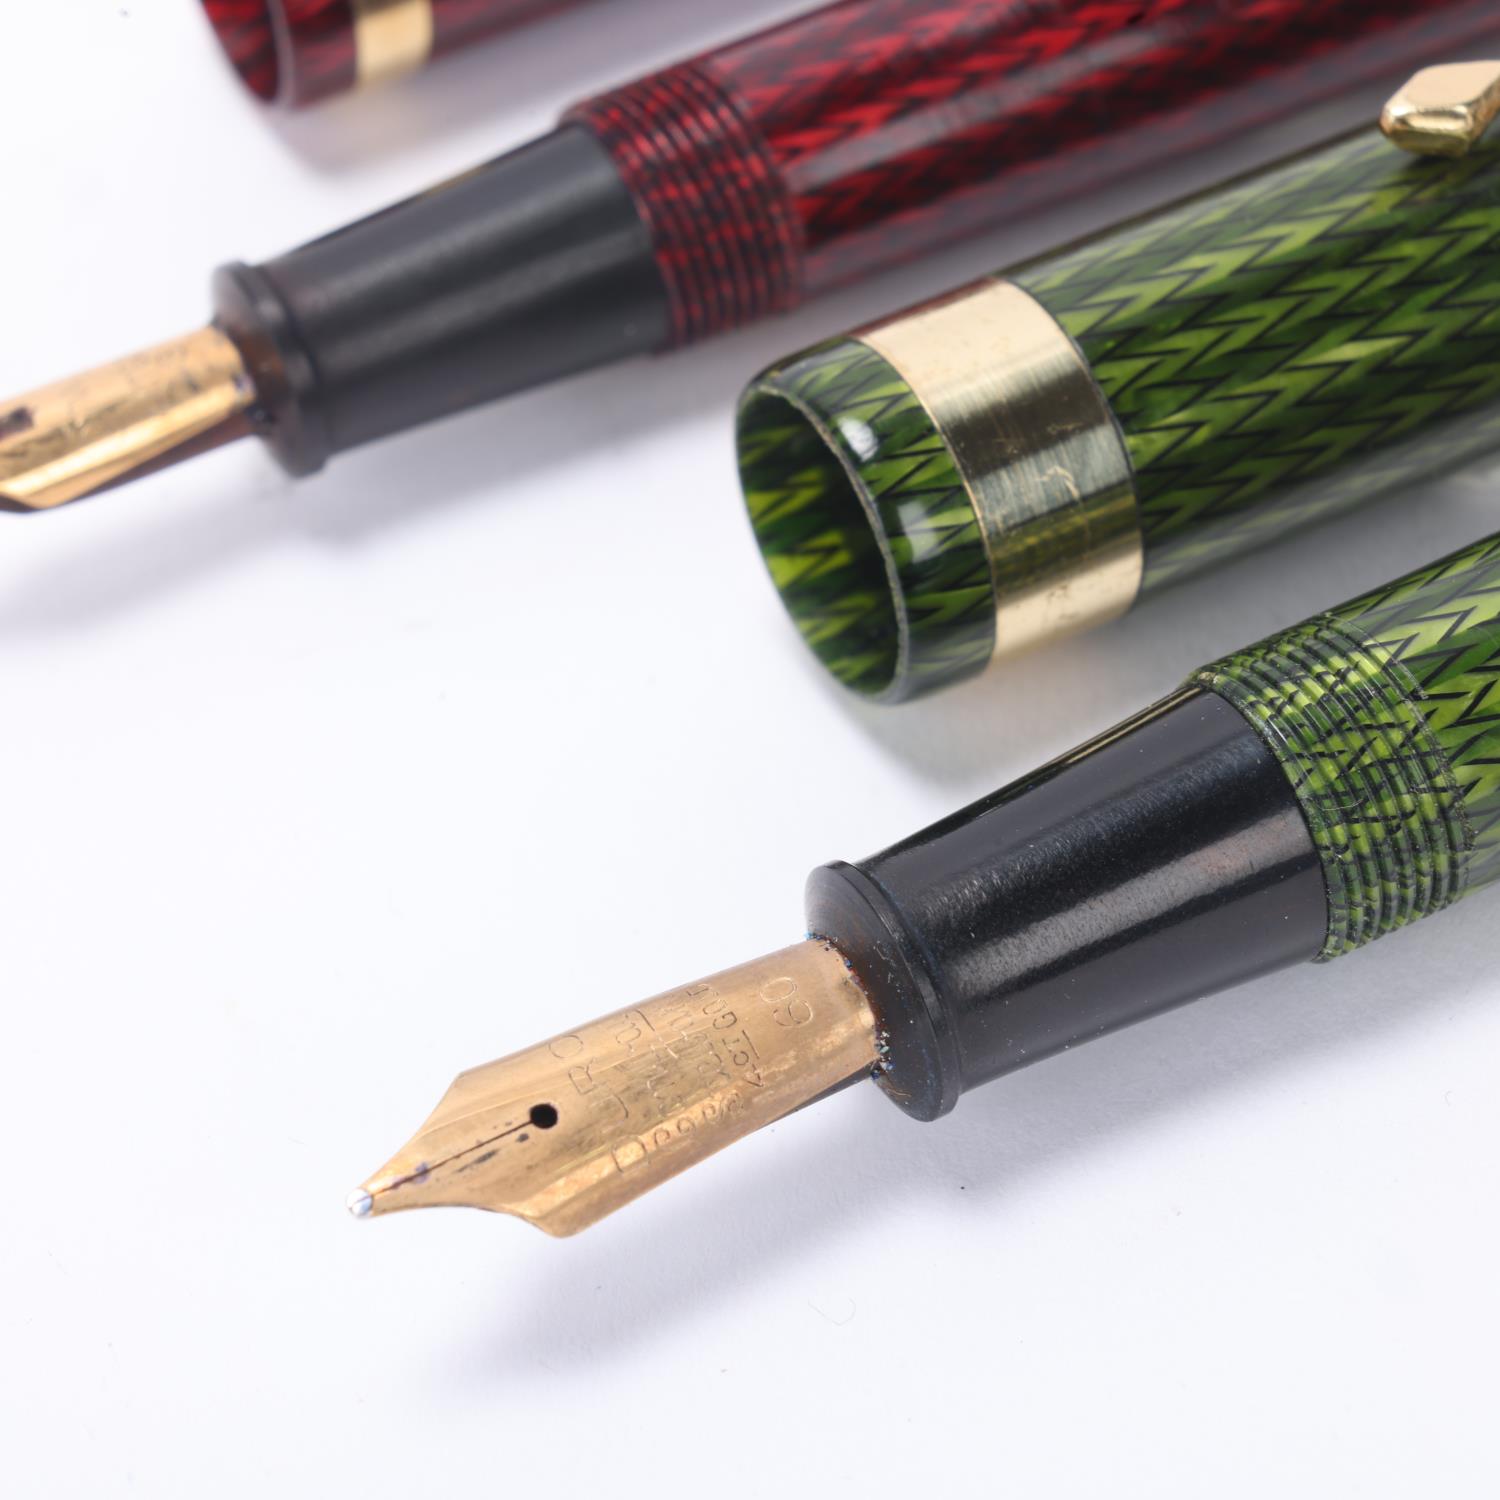 2 vintage Conway Stewart lever fill fountain pens, with 14ct nibs and herringbone lacquer bodies, - Image 2 of 4